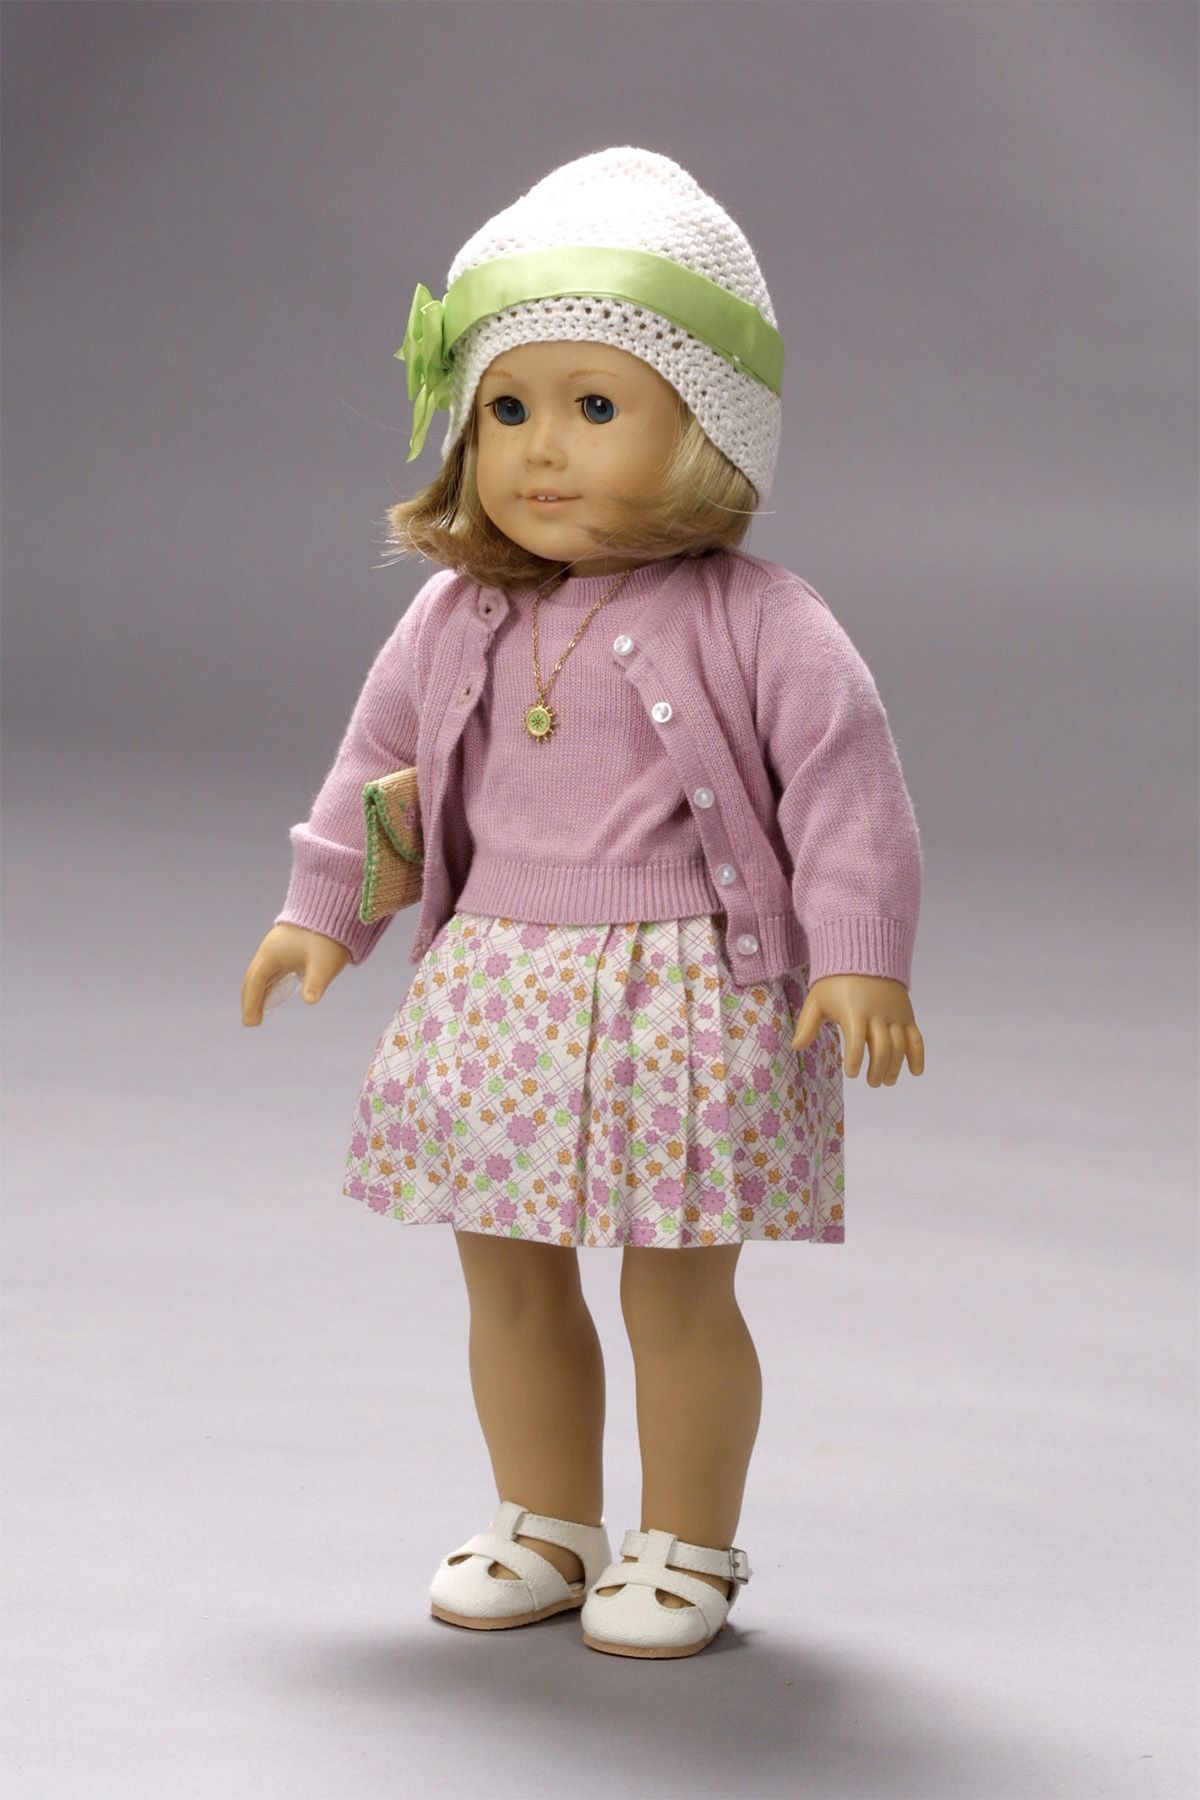 30 Facts You Didn't Know About American Girl Dolls | atelier-yuwa.ciao.jp